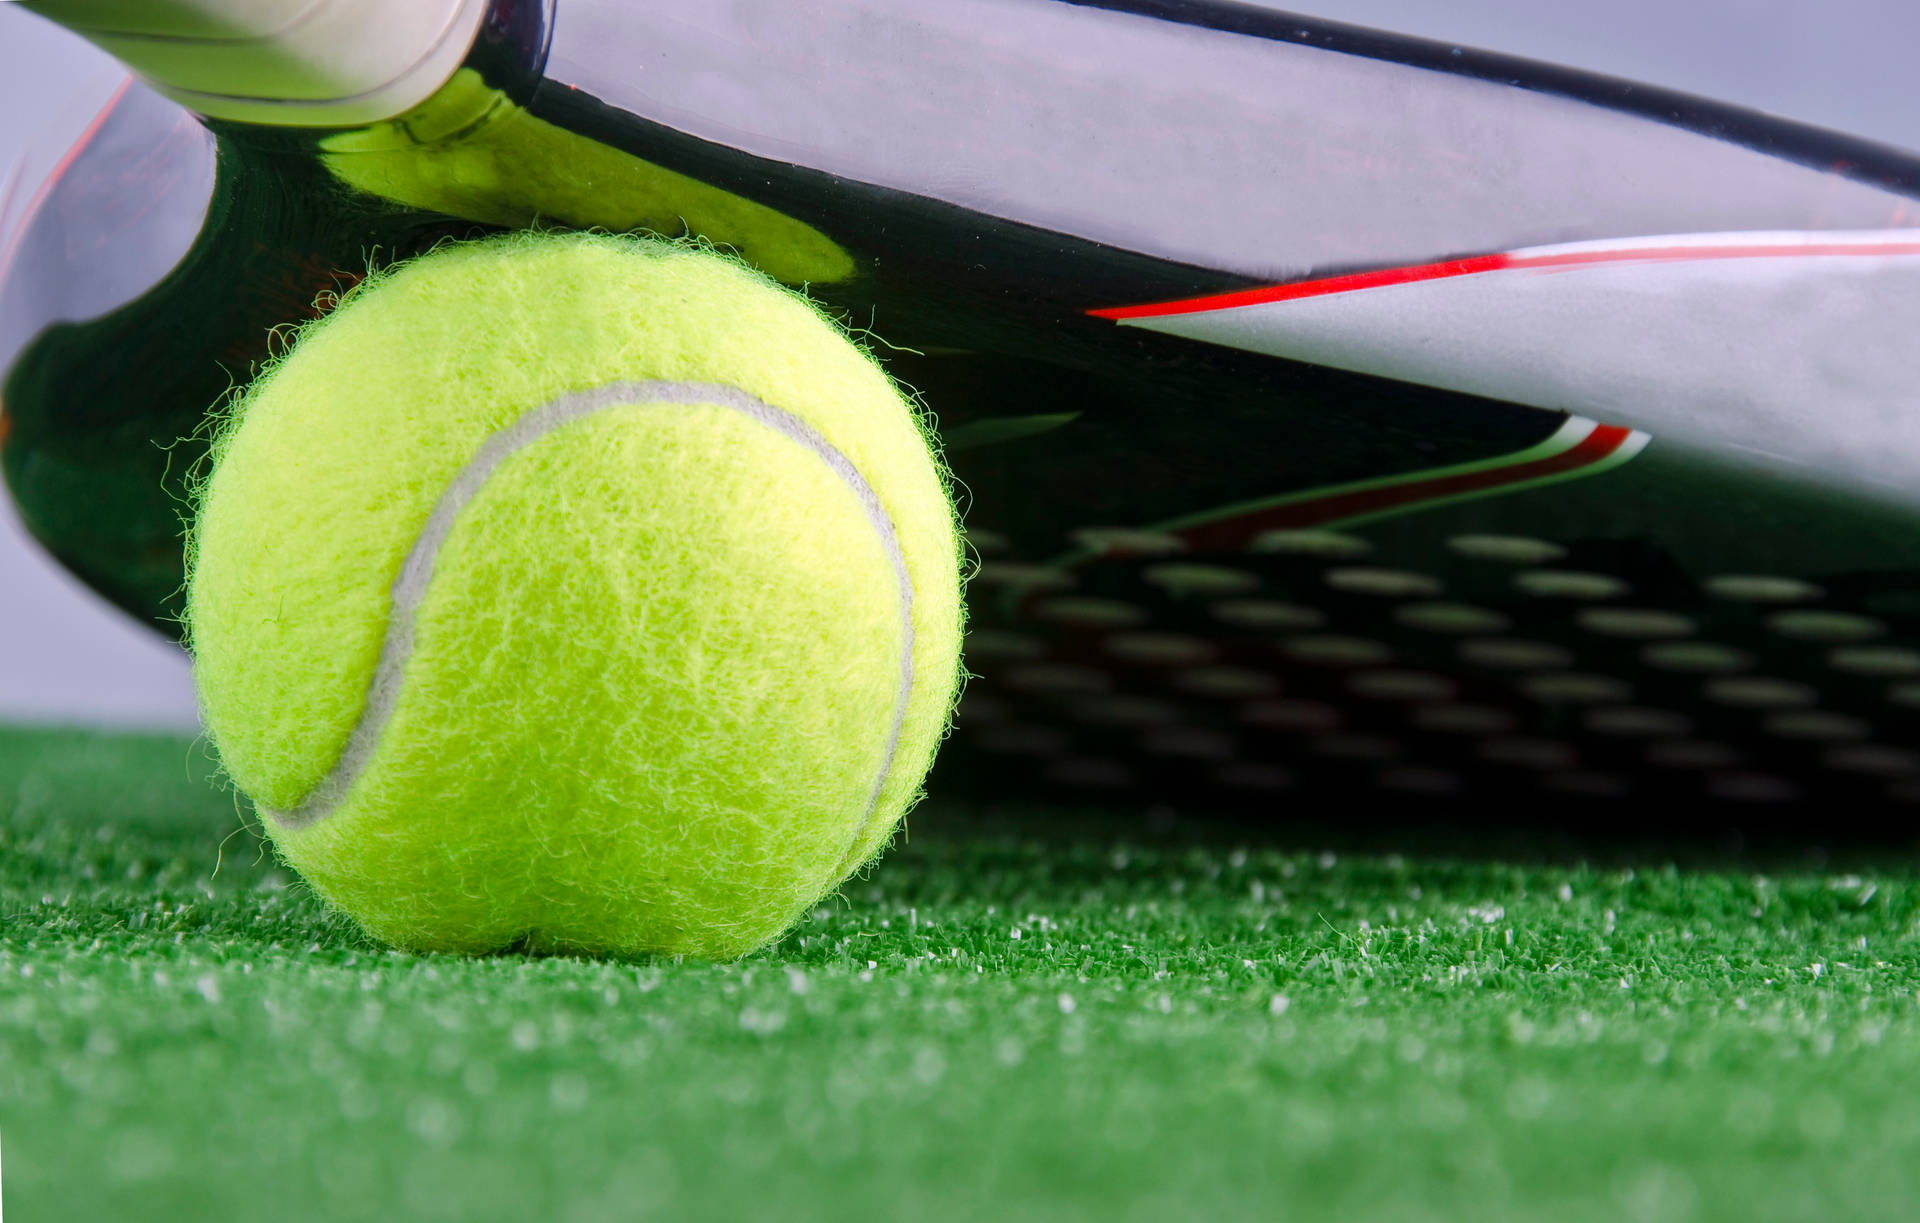 Precision in Details - Close-Up Shot of Tennis Ball Wallpaper